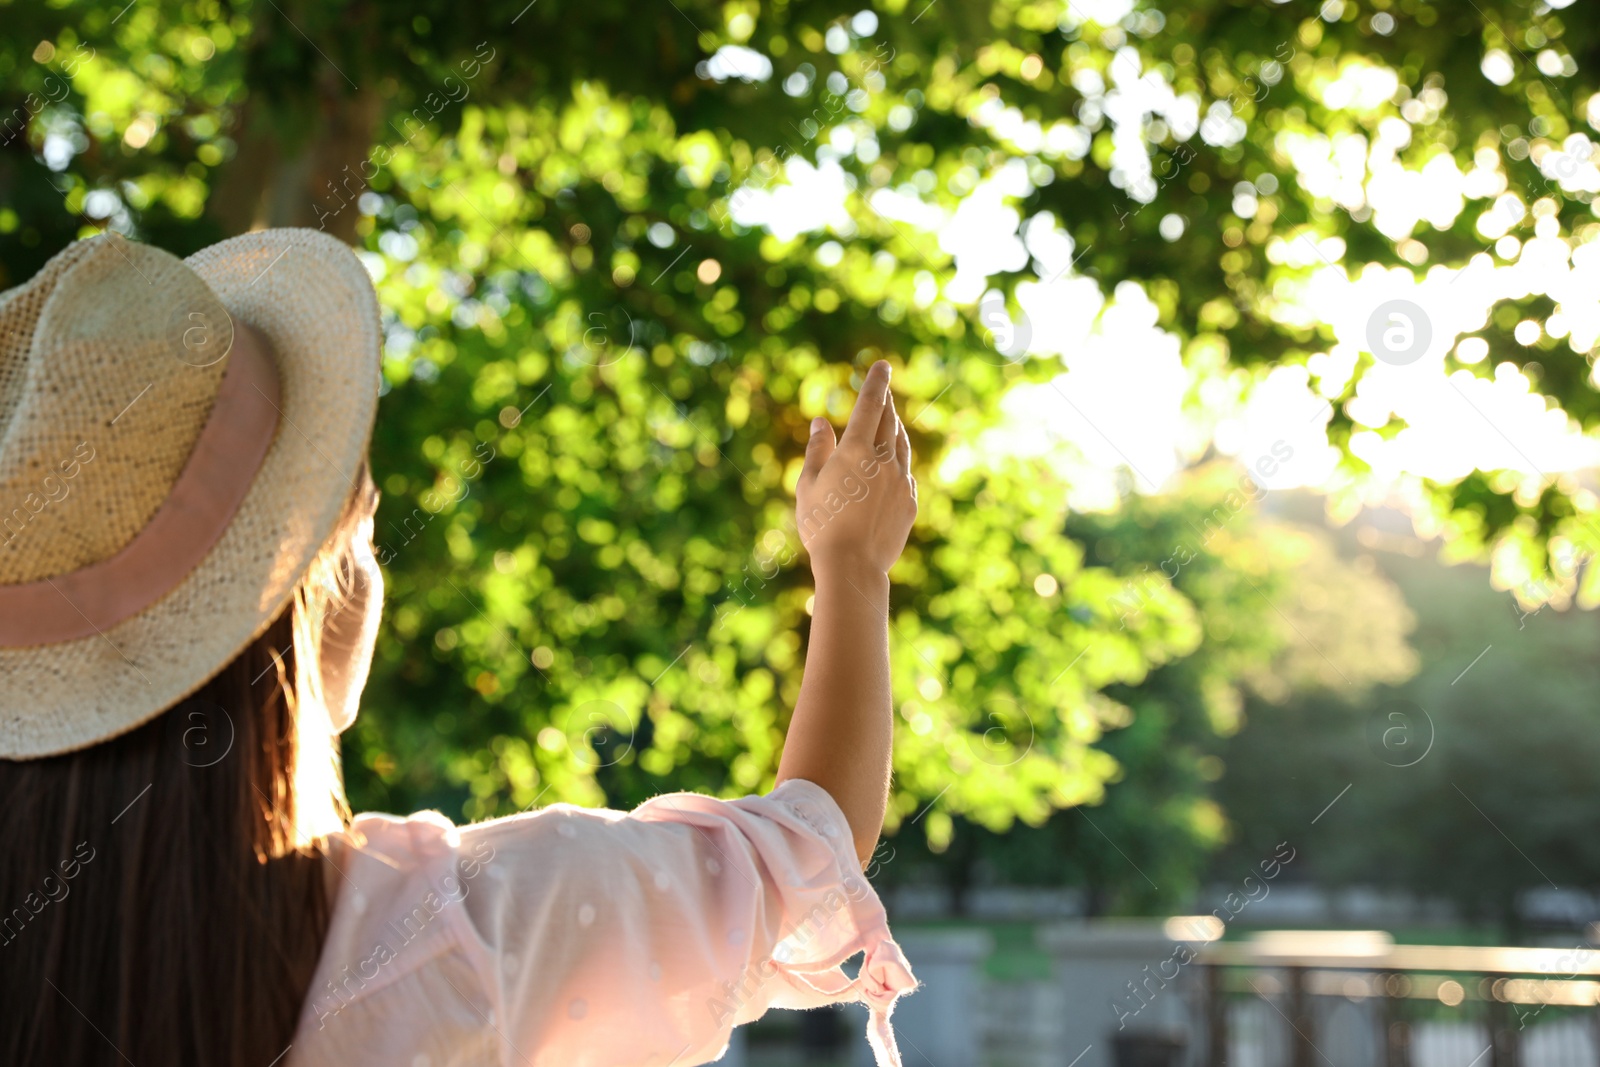 Photo of Young woman in hat outdoors on sunny day, back view